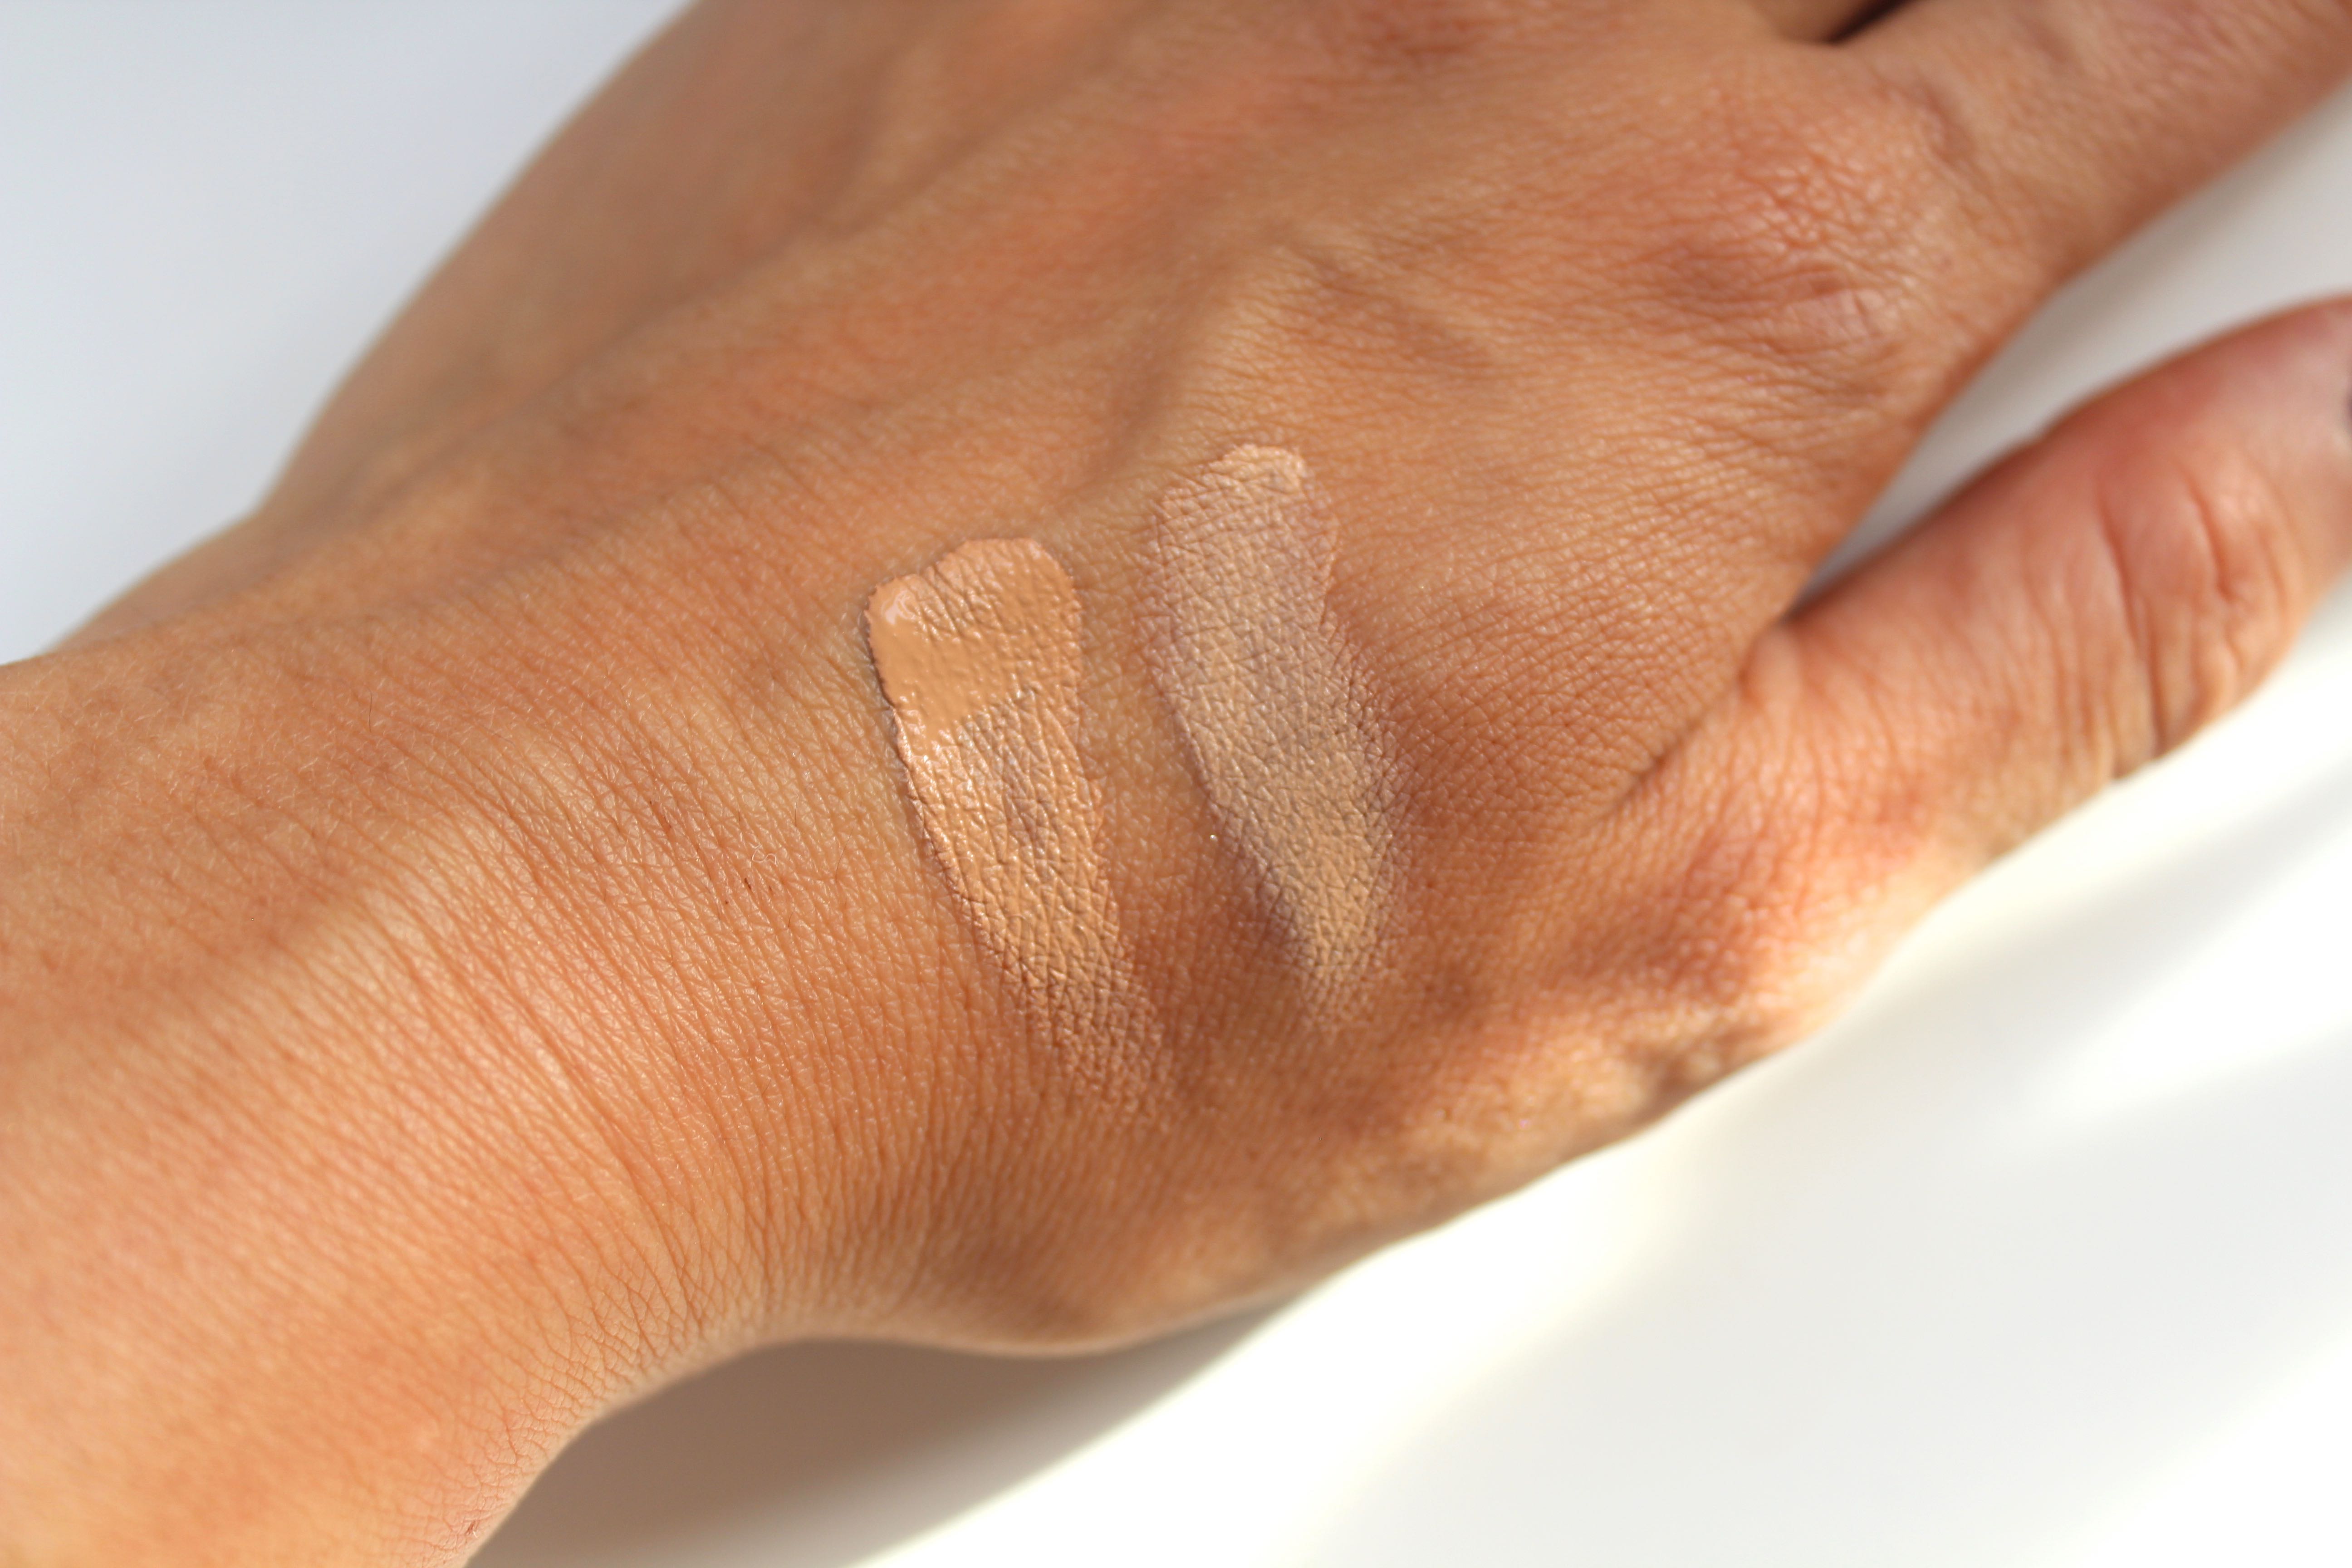 DERMABLEND Corrective Foundation MAKEUP - FLUID review by Facemadeup.com